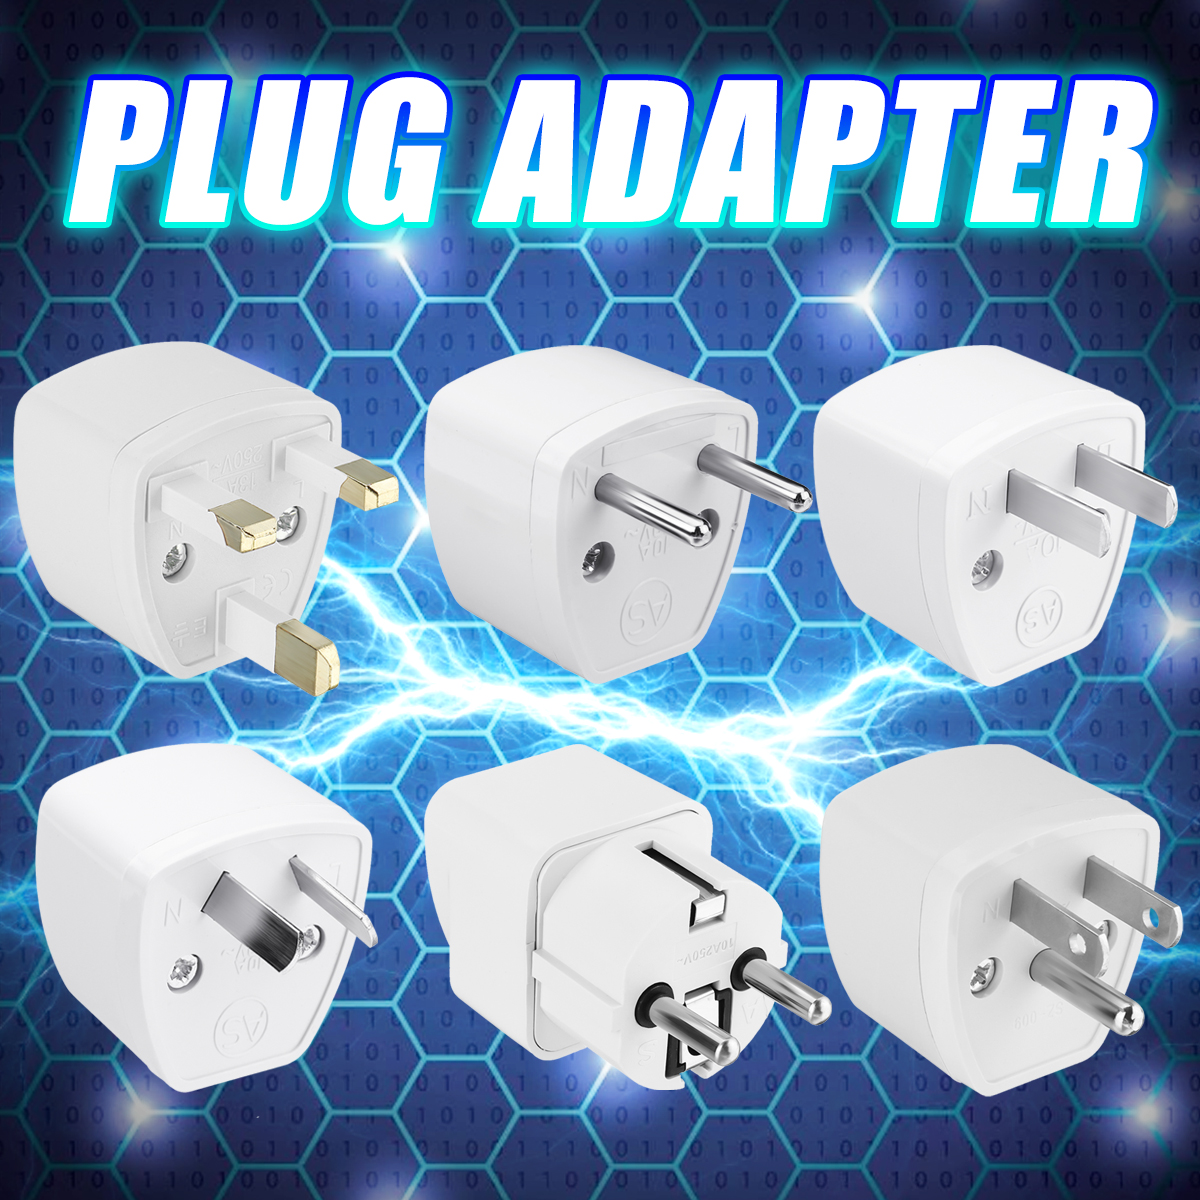 Global Universal Adapter Plug Adapter Charger Travel Wall AC Power Charger Outlet Adapter Converter